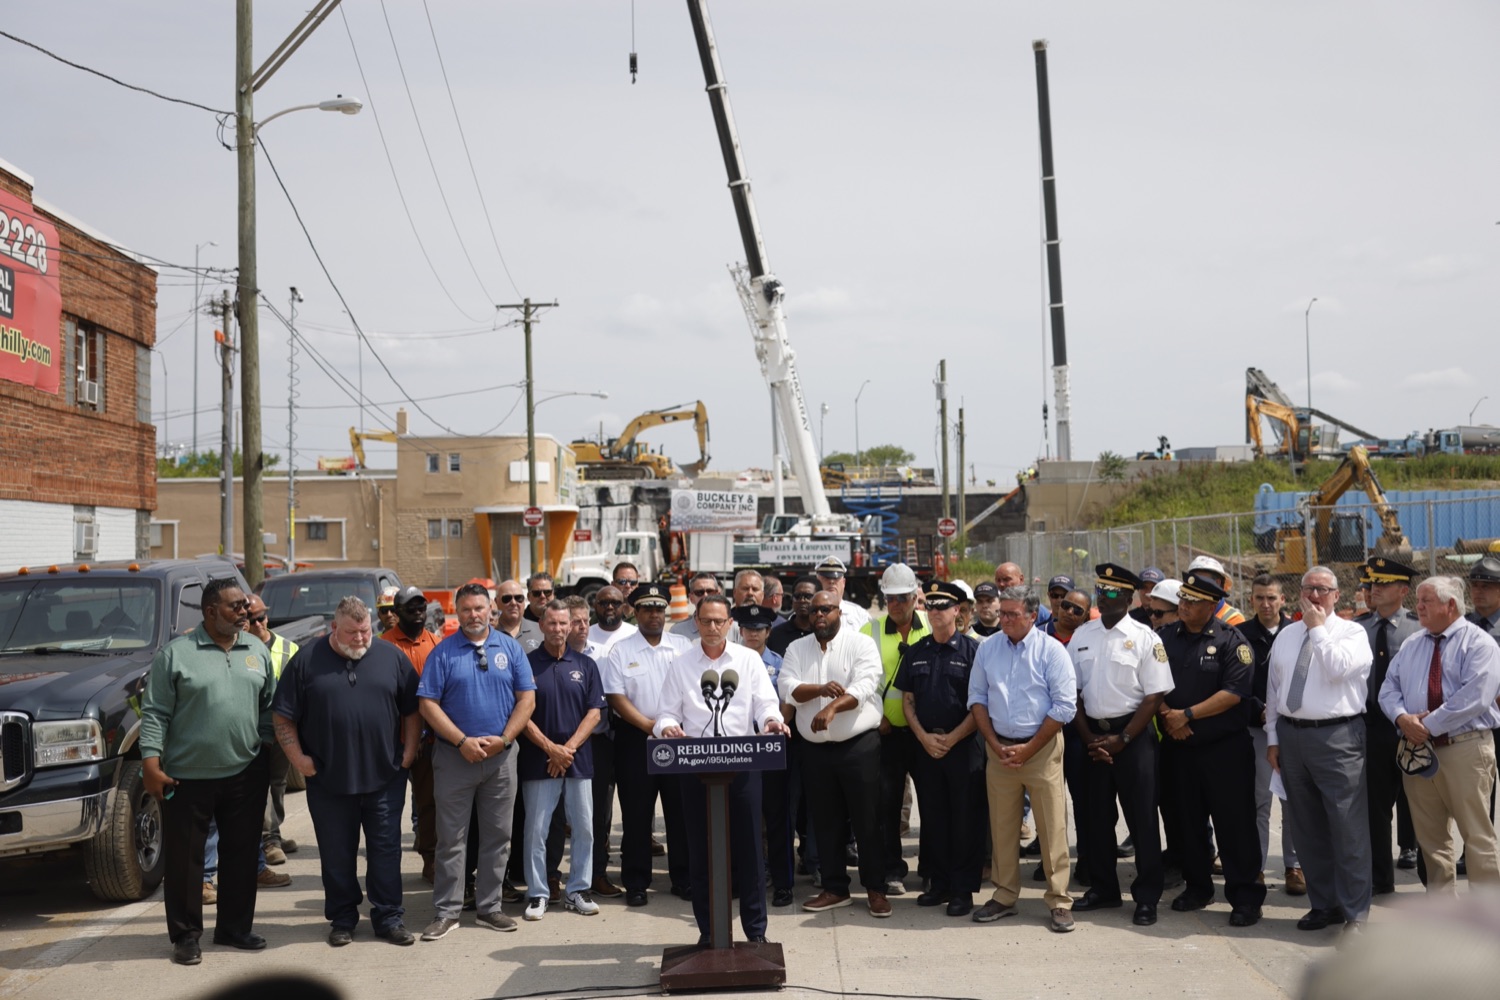 Governor Shapiro, PennDOT Secretary Carroll Announce I-95 Will Reopen This Weekend as the Shapiro Administrations Response Continues Ahead of Schedule<br><a href="https://filesource.amperwave.net/commonwealthofpa/photo/Image9.jpeg" target="_blank">⇣ Download Photo</a>